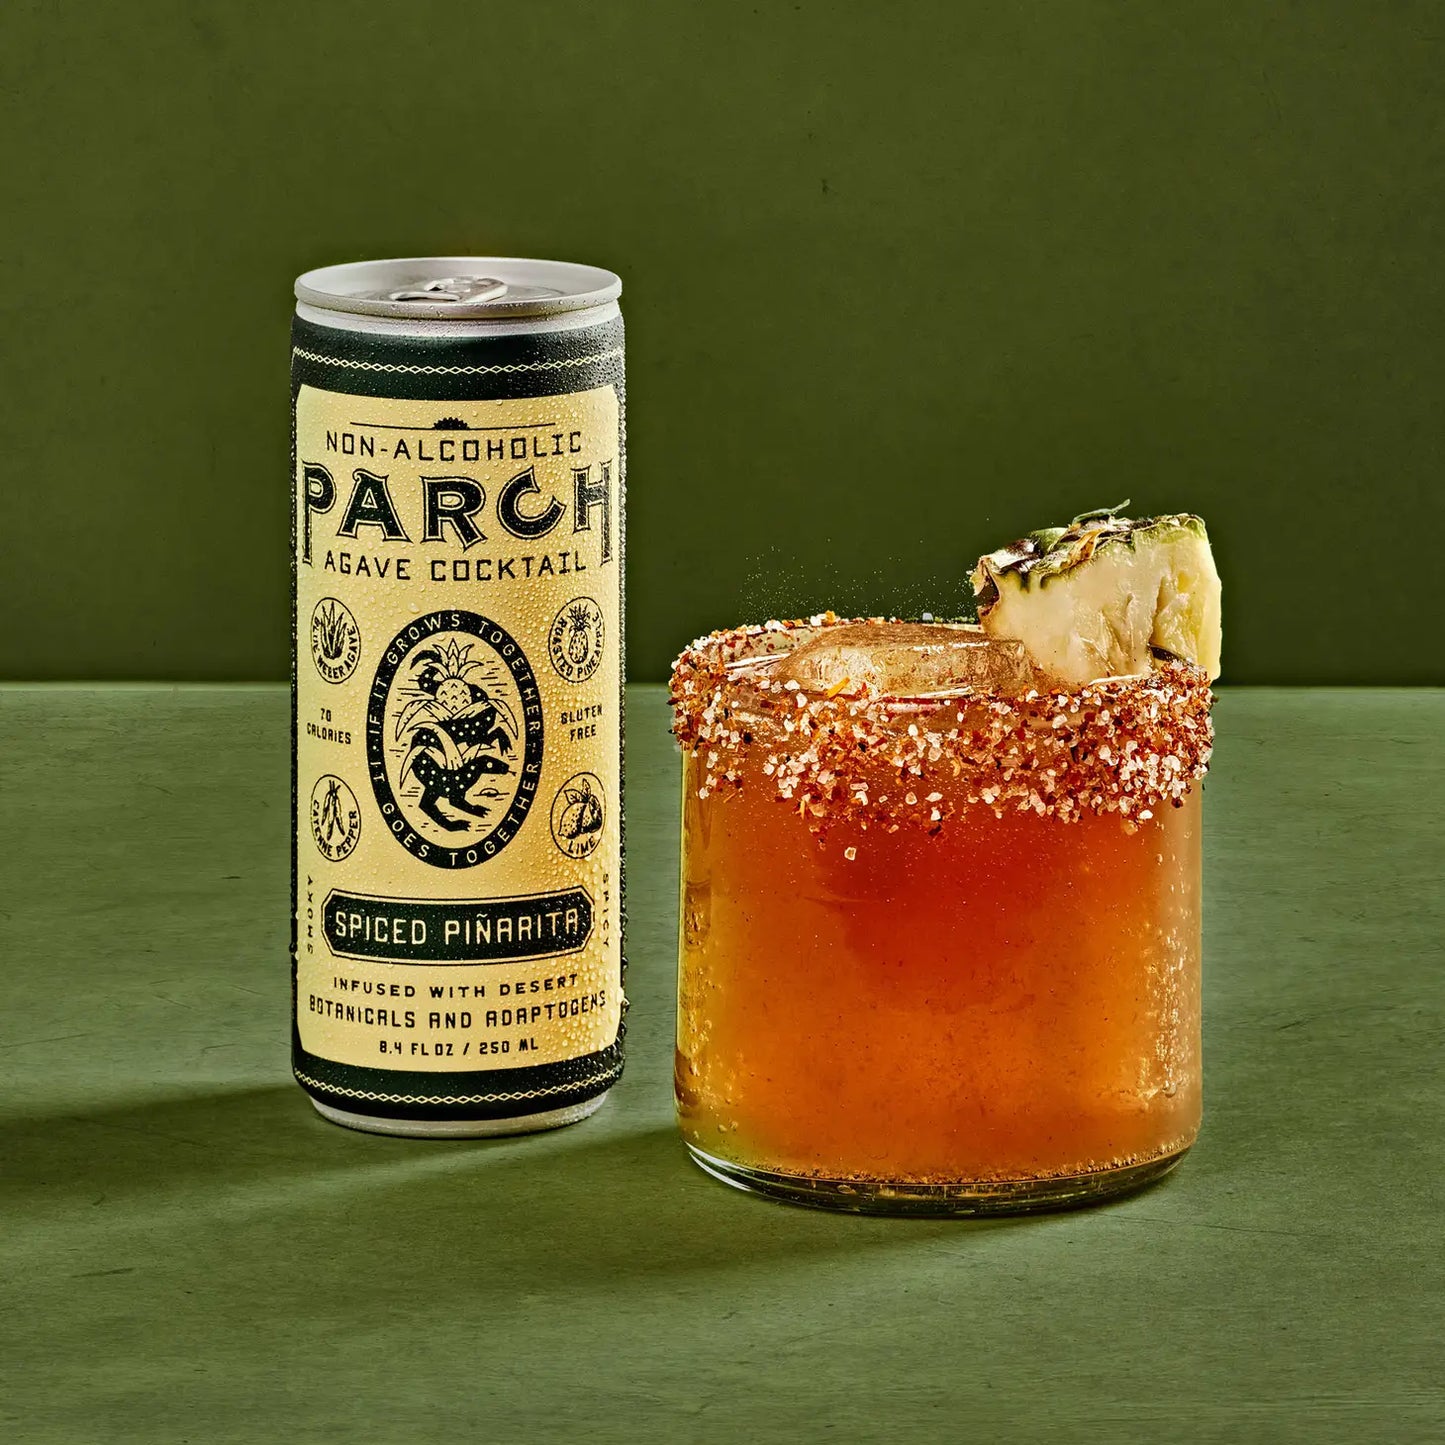 PARCH Non-Alcoholic Agave Cocktail 4-packs